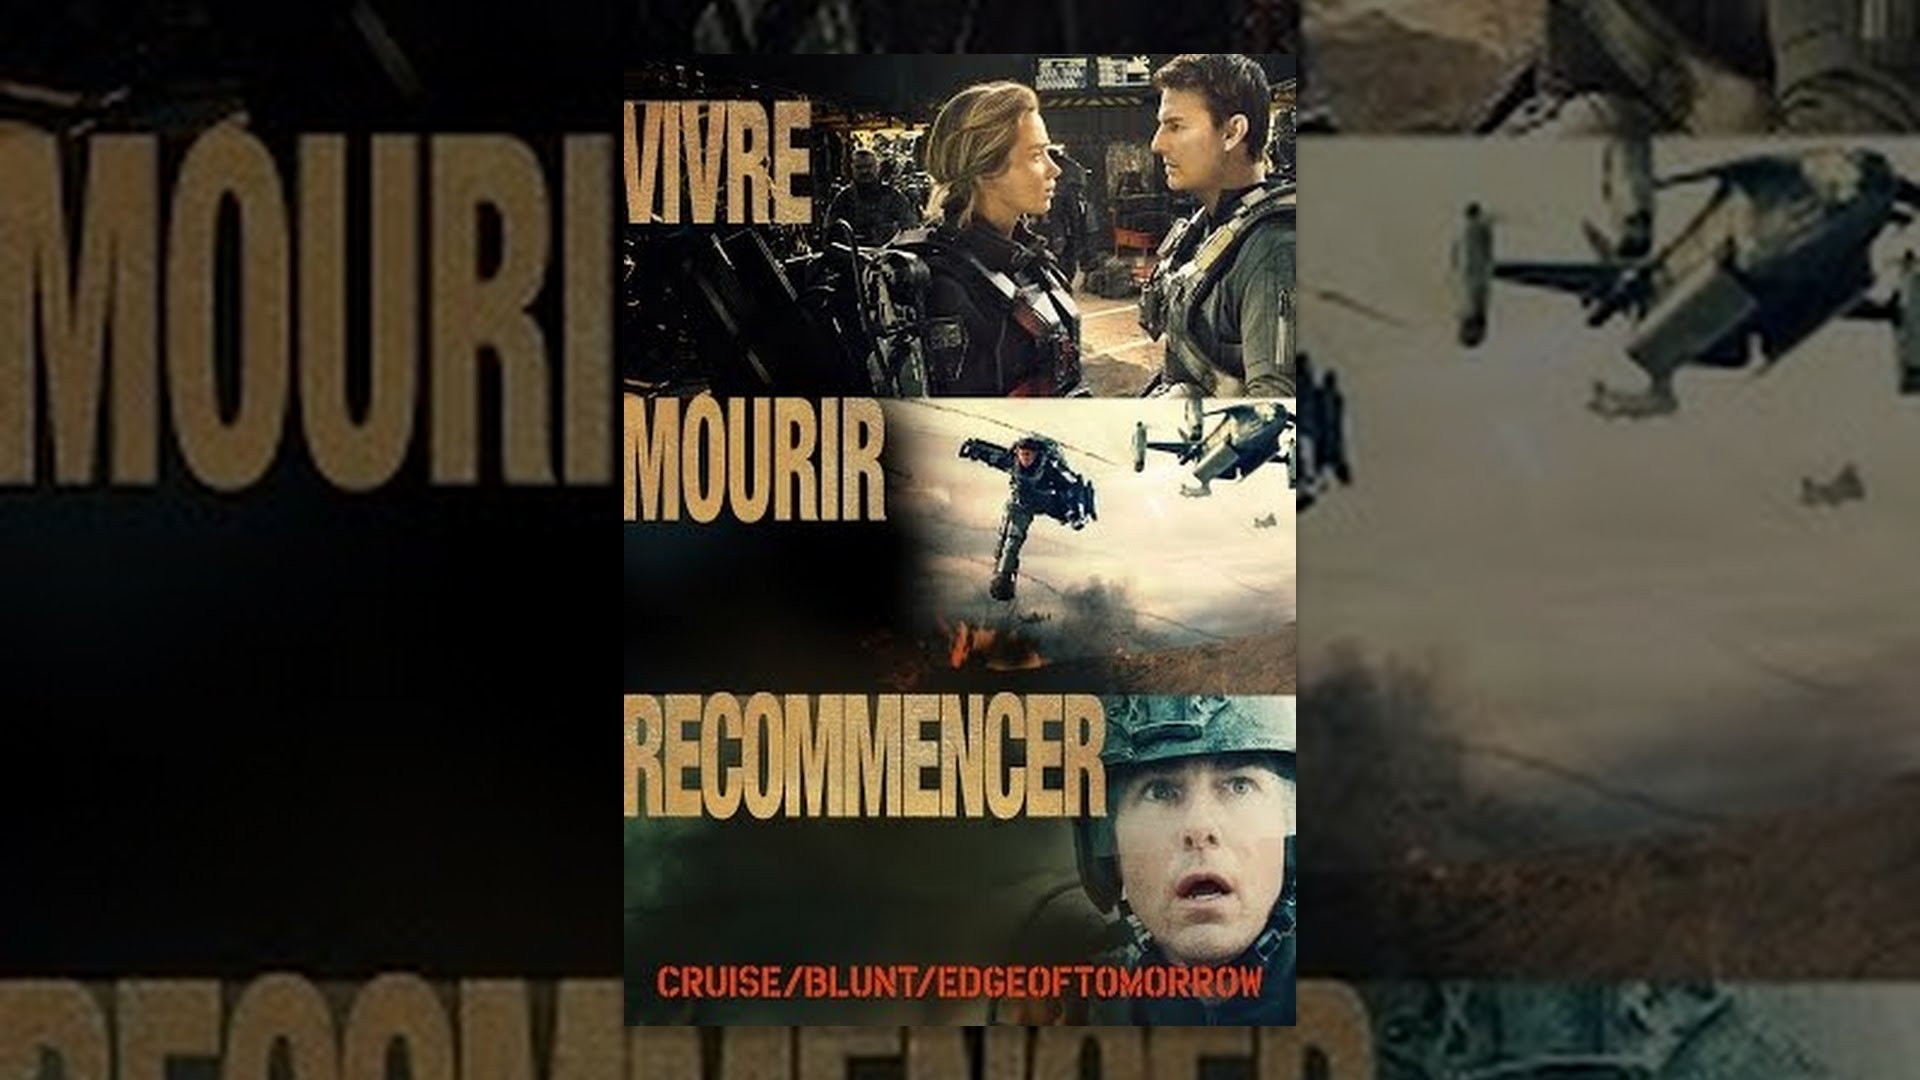 Vivre Mourir Recommencer: Edge of Tomorrow (VF) - YouTube Movies